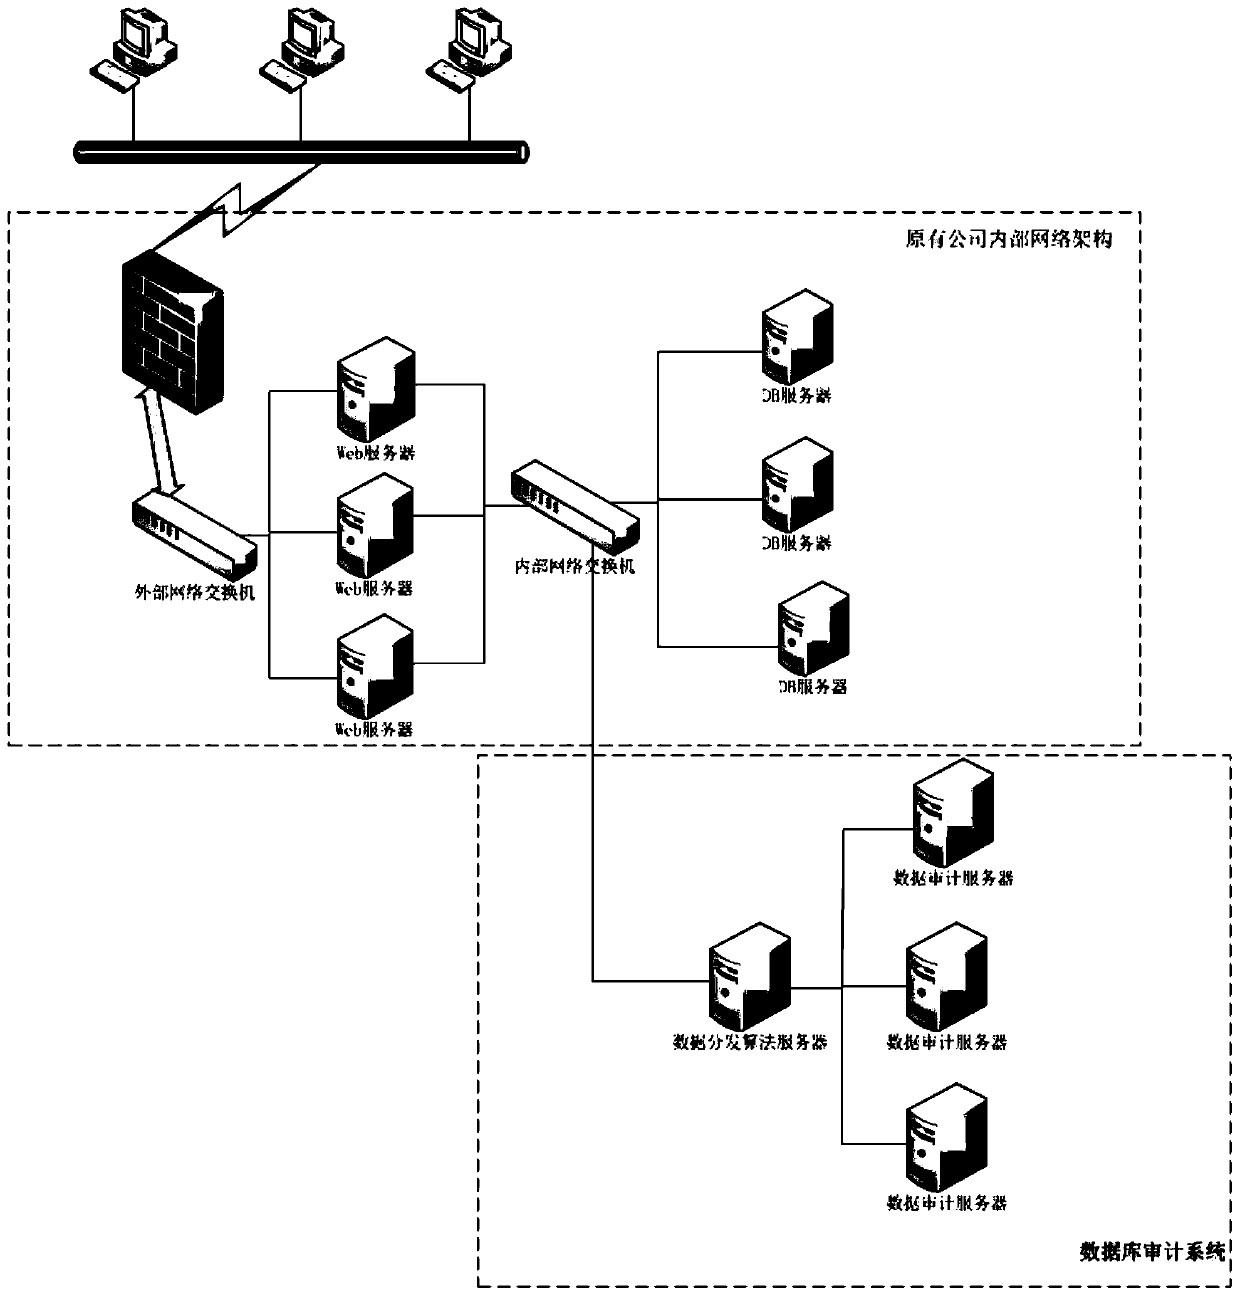 A big data distribution method for an industrial control security database auditing system